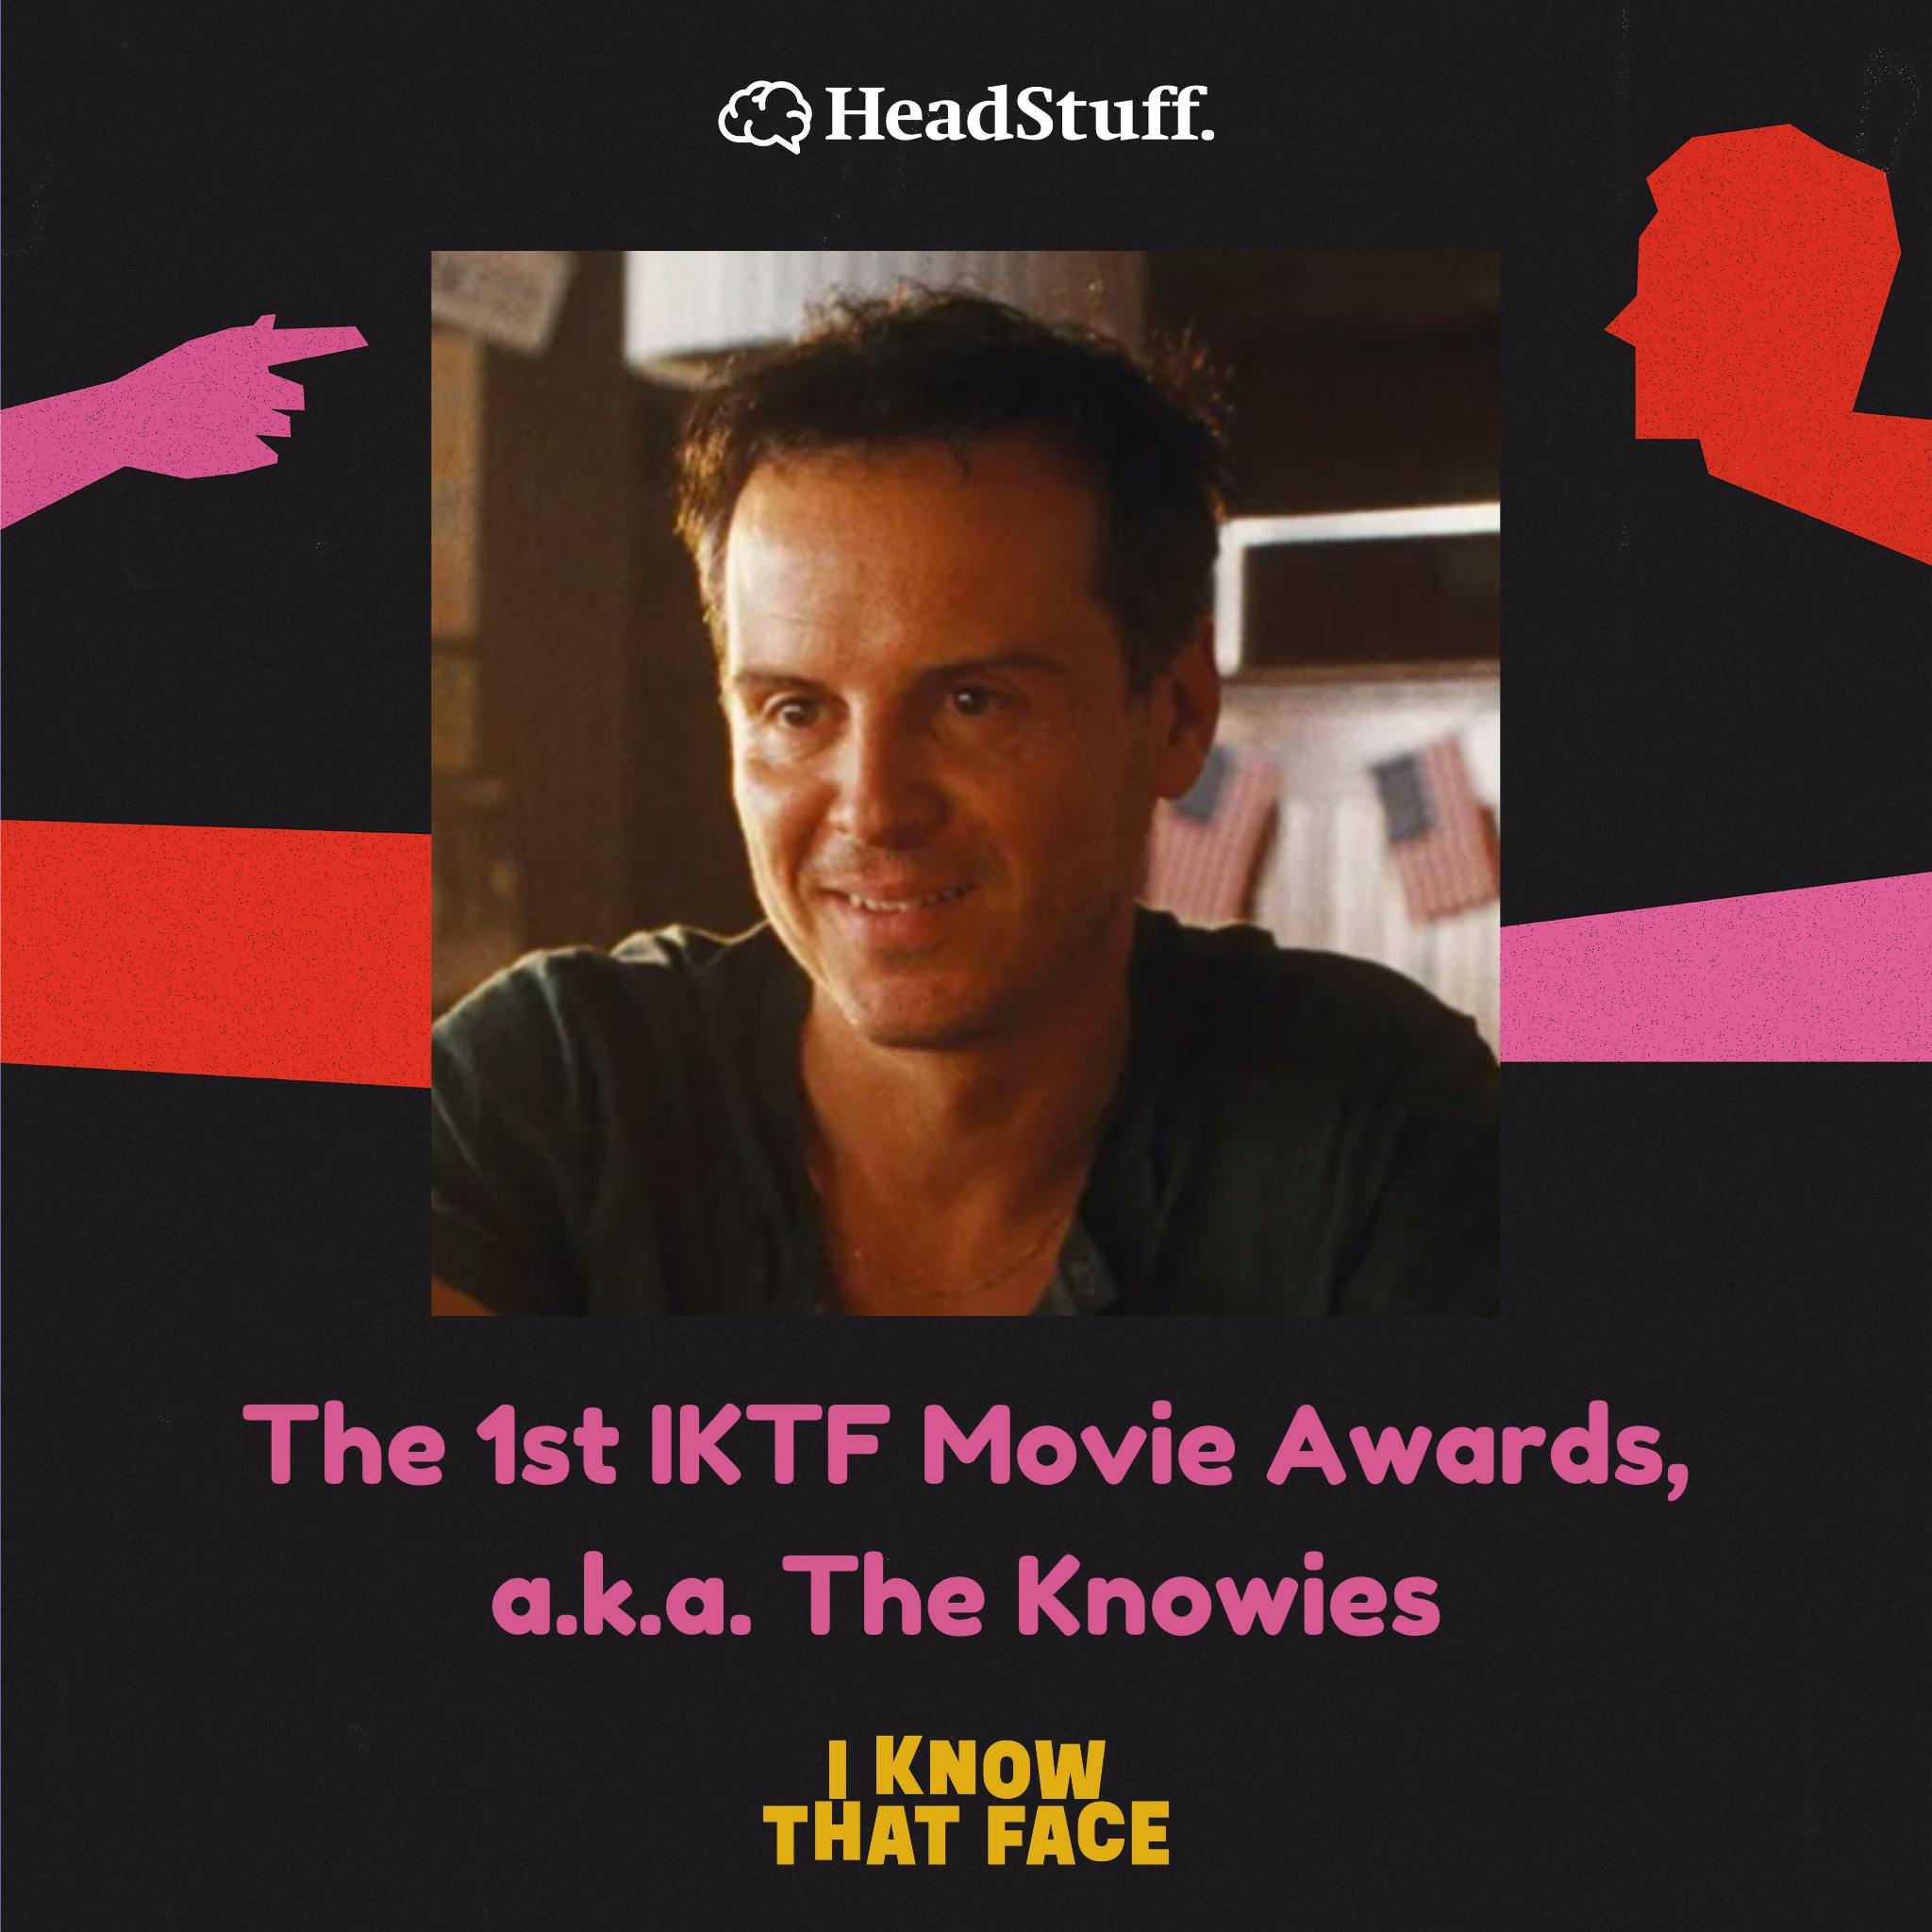 The 1st IKTF Movie Awards, a.k.a. The Knowies